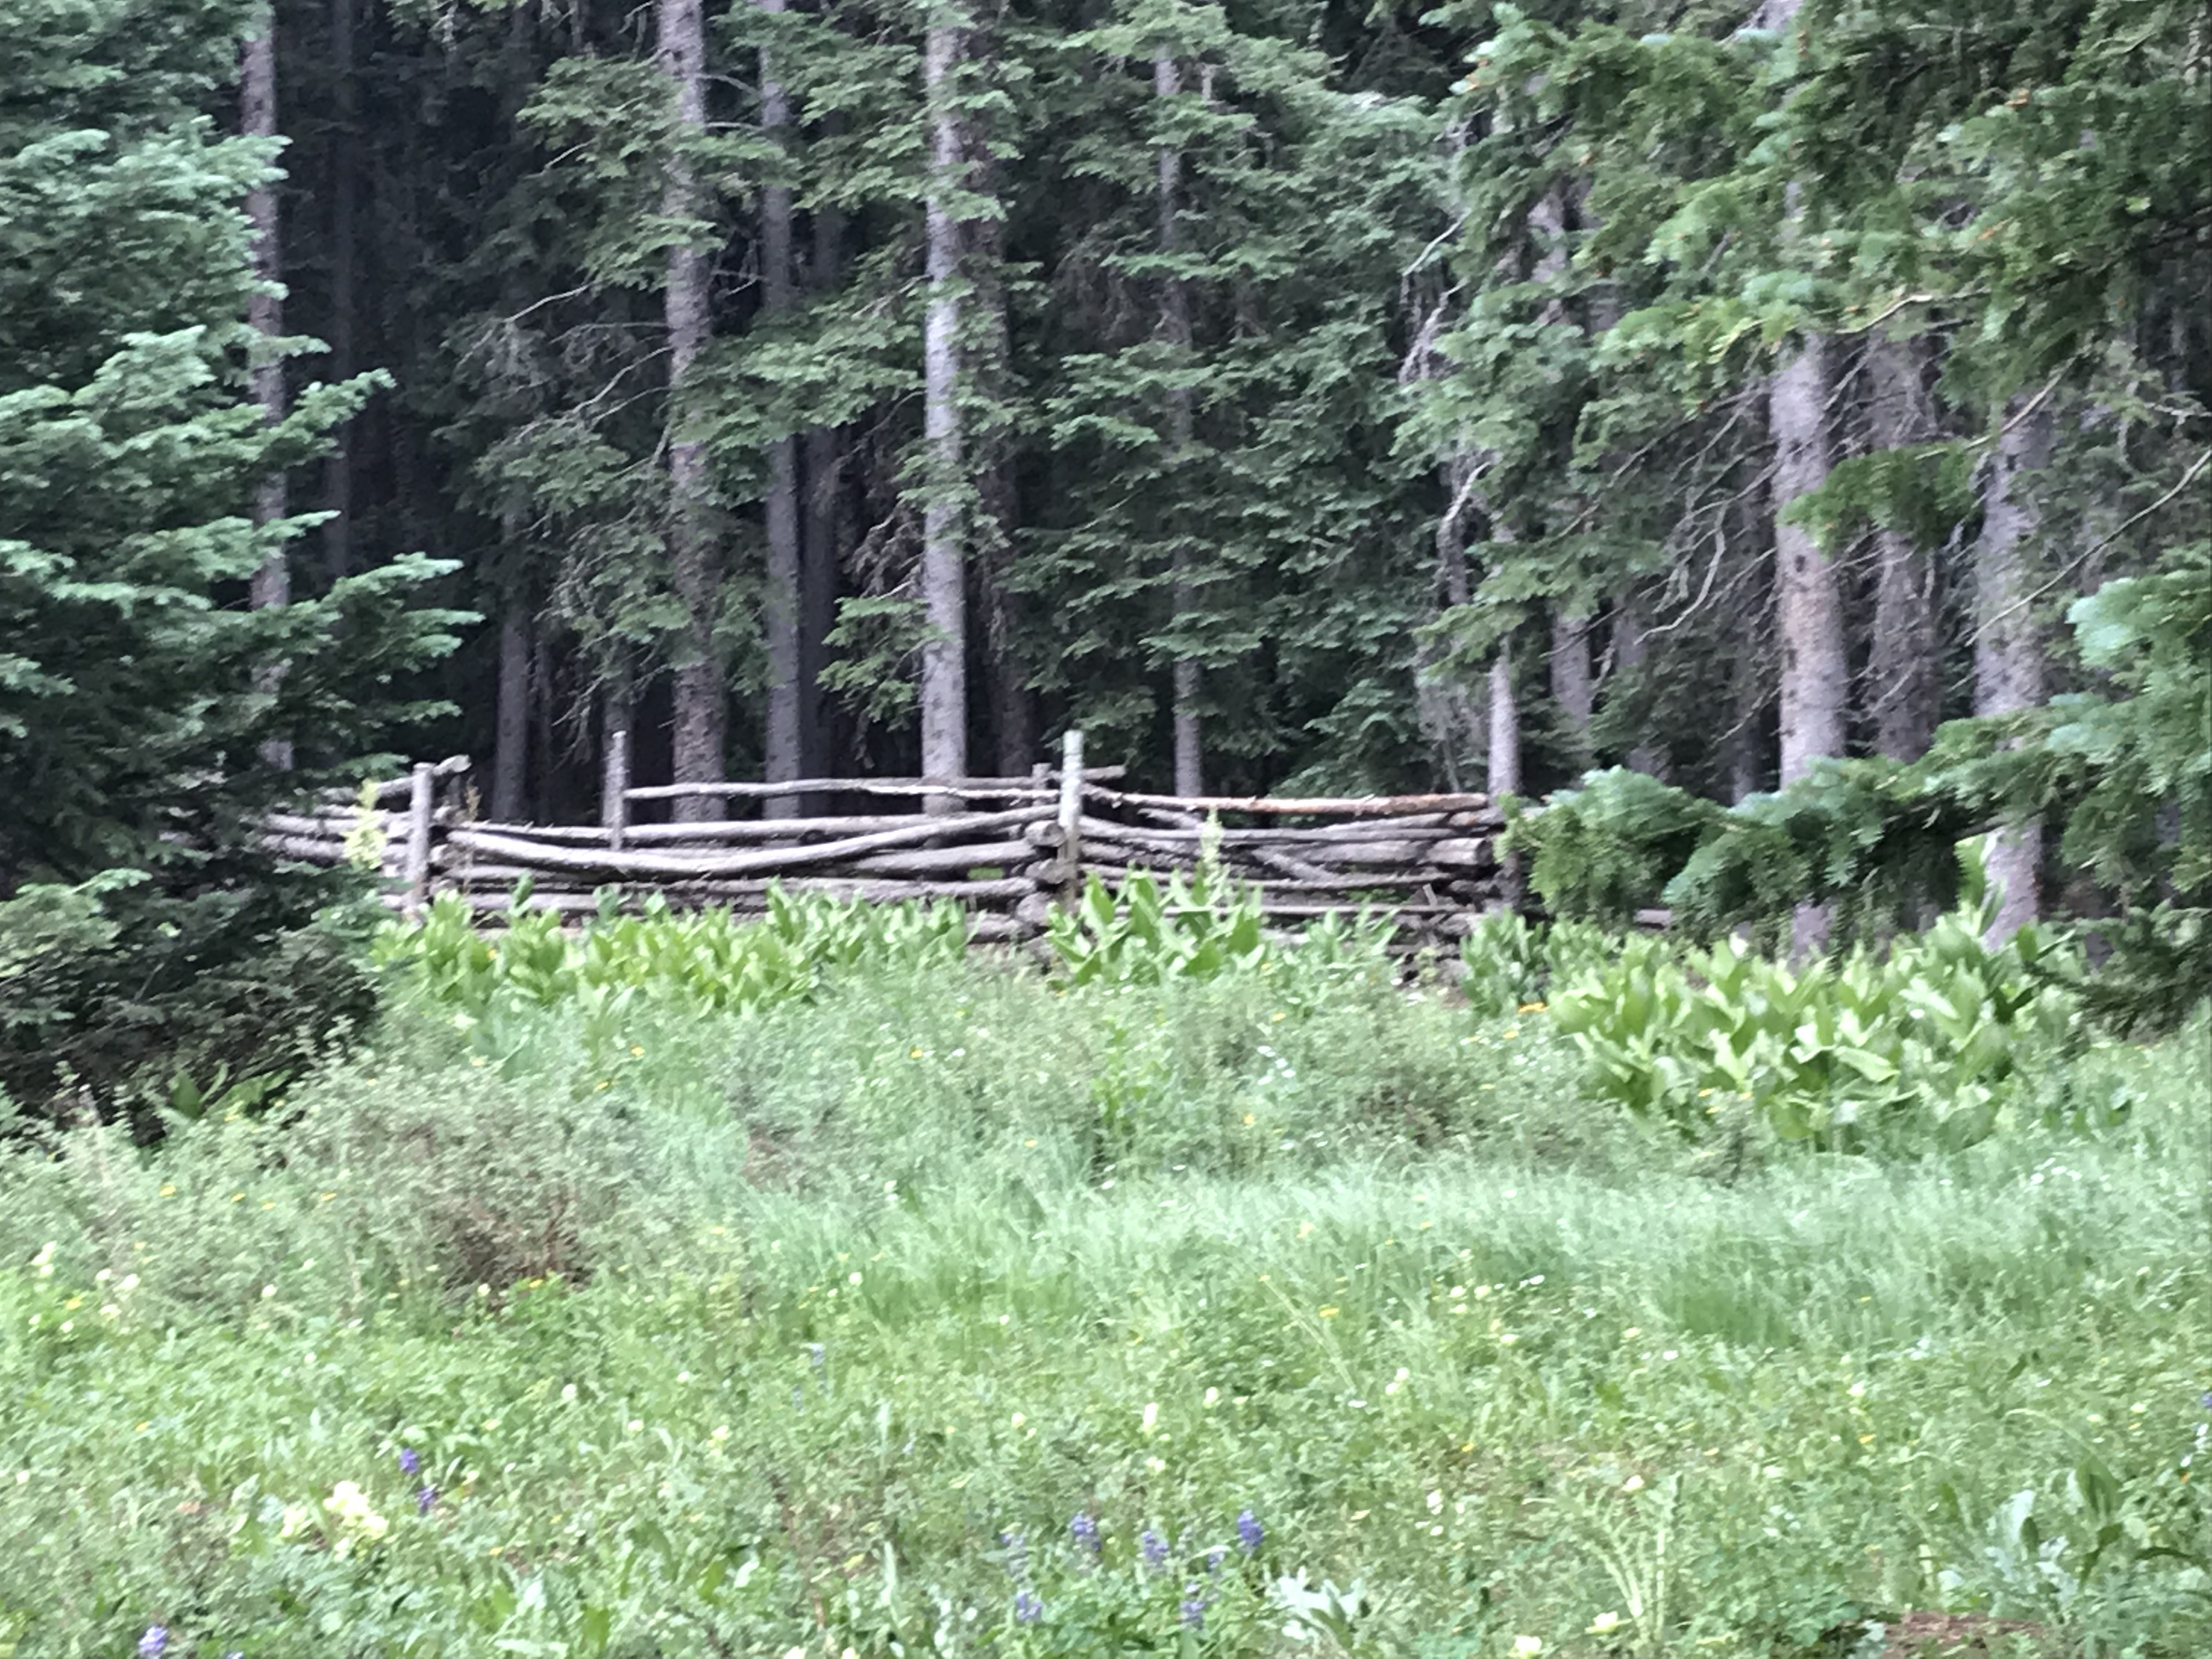 An old, wooden fence-surround sits in a grassy, open space just outside a deep woods surrounded by tall pine trees